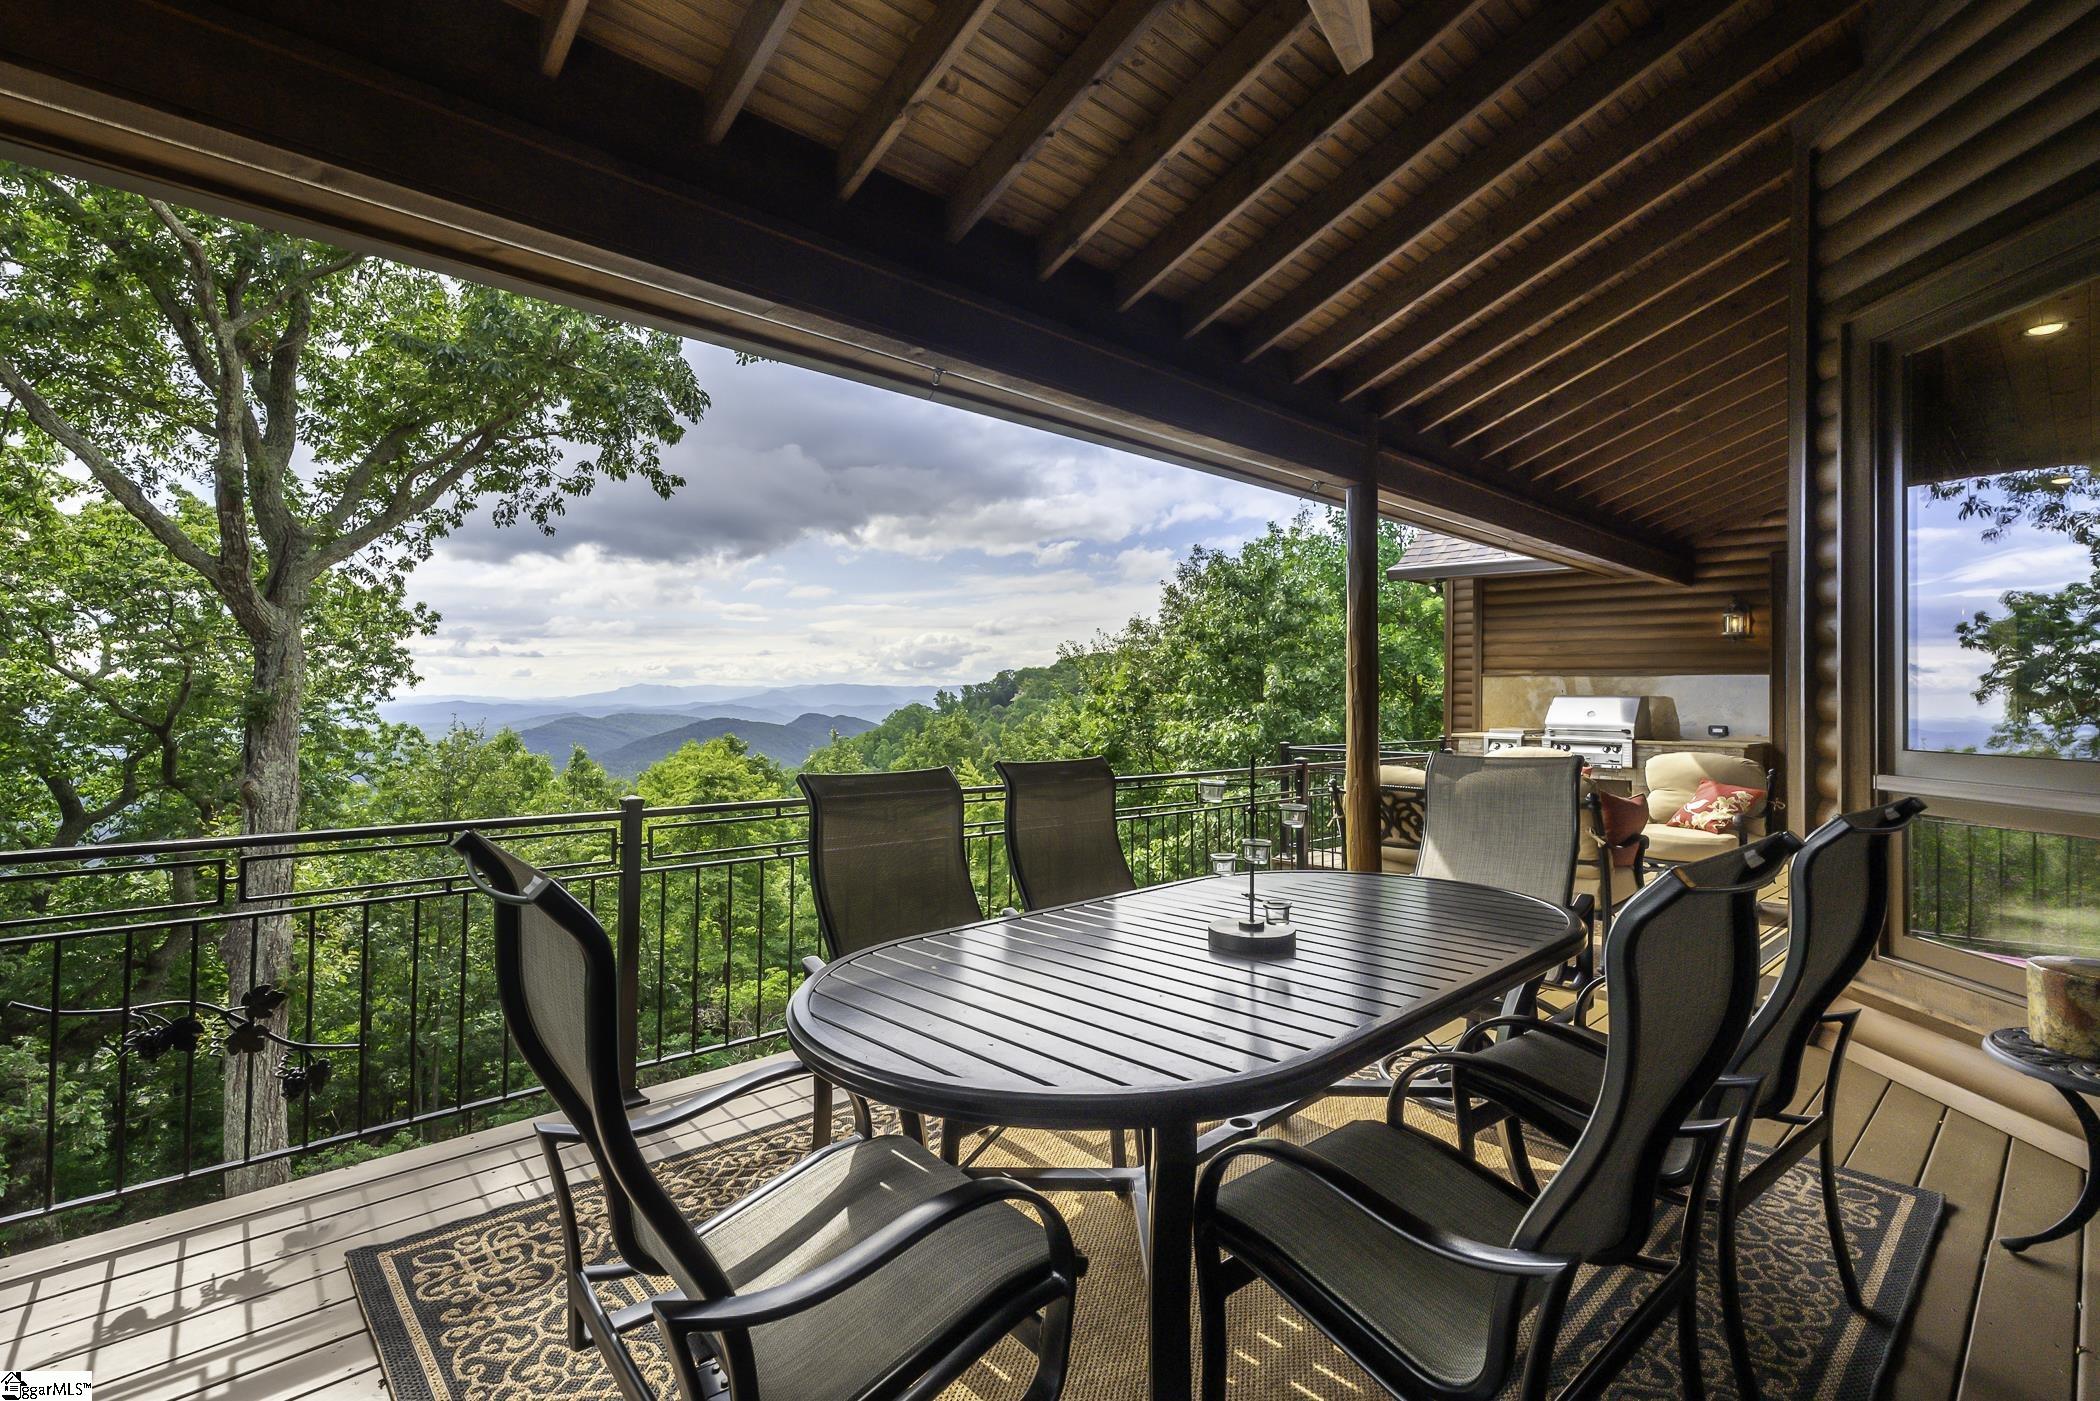 Come see this picturesque Glassy Mountain residence with magnificent wide-range views of the Upstate, Lake Robinson, and Table Rock. Originally built in 1997 by former NFL player and coach Sam Wyche, this four bedroom, three bath home was renovated in 2018 and offers opulent resort lodge living with easy access to downtown Greenville and Asheville. It is perfect for hosting large groups or just relaxing with friends and family.  A dual drive leads to either the garage parking or the convenient main entrance porte cochere.  Through the custom crafted iron entry door, a welcoming foyer opens to the rustic great room, accentuated by a 24 foot vaulted ceiling, a natural stone fireplace, and wood log paneling.  Panoramic windows are everywhere and draw the eye outside to the stunning views.  Curry and Company mercury glass chandeliers create a soft ambiance for the living and dining spaces.   The kitchen is open to the great room and features updated luxury kitchen appliances including:  Liebherr refrigerator and wine chiller: Zephyr beverage center;  Uline ice machine;  American Range stove, double ovens, and warming drawer;  and an Asko dishwasher.  Also included are custom wood cabinets with soft close hardware, under counter lighting and filtered water at the sink.  The outdoor cooking area, with an Alfresco grill and side burner, is located on the deck just steps from the kitchen.  Enjoy the splendid sunsets from the adjacent sitting area flanked by generous windows with remote controlled Hunter Douglas blinds.  The main level primary bedroom is highlighted by a dual bathroom with separate commodes, vanities, and cedar walk-in closets while sharing a double entrance shower with dual showerheads.  The home has two water heaters, one dedicated to the primary bathroom and the other, assisted by a Grundfos circulating pump, serves the rest of the home.  The suite opens to a sitting area on the covered deck with custom iron railing, outdoor shades, and sweeping views. The second bedroom with vaulted two story ceiling and an exquisite bath completes the main level.  Upstairs, a large loft with liberal storage makes for a perfect office and overlooks the main level living areas.  Downstairs is an additional gathering area with a handsome bar containing an Uline ice machine and beverage cooler.  The full bath has been tastefully updated and is shared by the additional two bedrooms.  One bedroom, currently being used as a home office, displays built-in cabinetry with two Zephyr wine chillers.  The other connects to the peaceful screened-in porch with wood burning stove.  There is access to the over-sized garage with sealed floors and My-Q openers that can be operated via keypad and from your smart phone.  There is a great deal of entertaining space on both the upstairs and downstairs decks as well as the new stone patio with electronic ignition gas fire pit and steel surround.  There are two resident-owned propane tanks with one dedicated to the fire pit, as well as two septic tanks.  A new roof has been installed with 50 year shingles.  The landscape has been beautifully updated and features exterior low voltage lighting.  A security system with motion detection has been wired for every entry.  There are speakers in every room as well as outside and the Honeywell thermostats can also be operated from your smart phone.  This approximately 4,000 square foot estate is located on a nearly two acre lot with one of the best views from Glassy.  This IS impressive mountain living.  A full Cliffs golf membership is available.